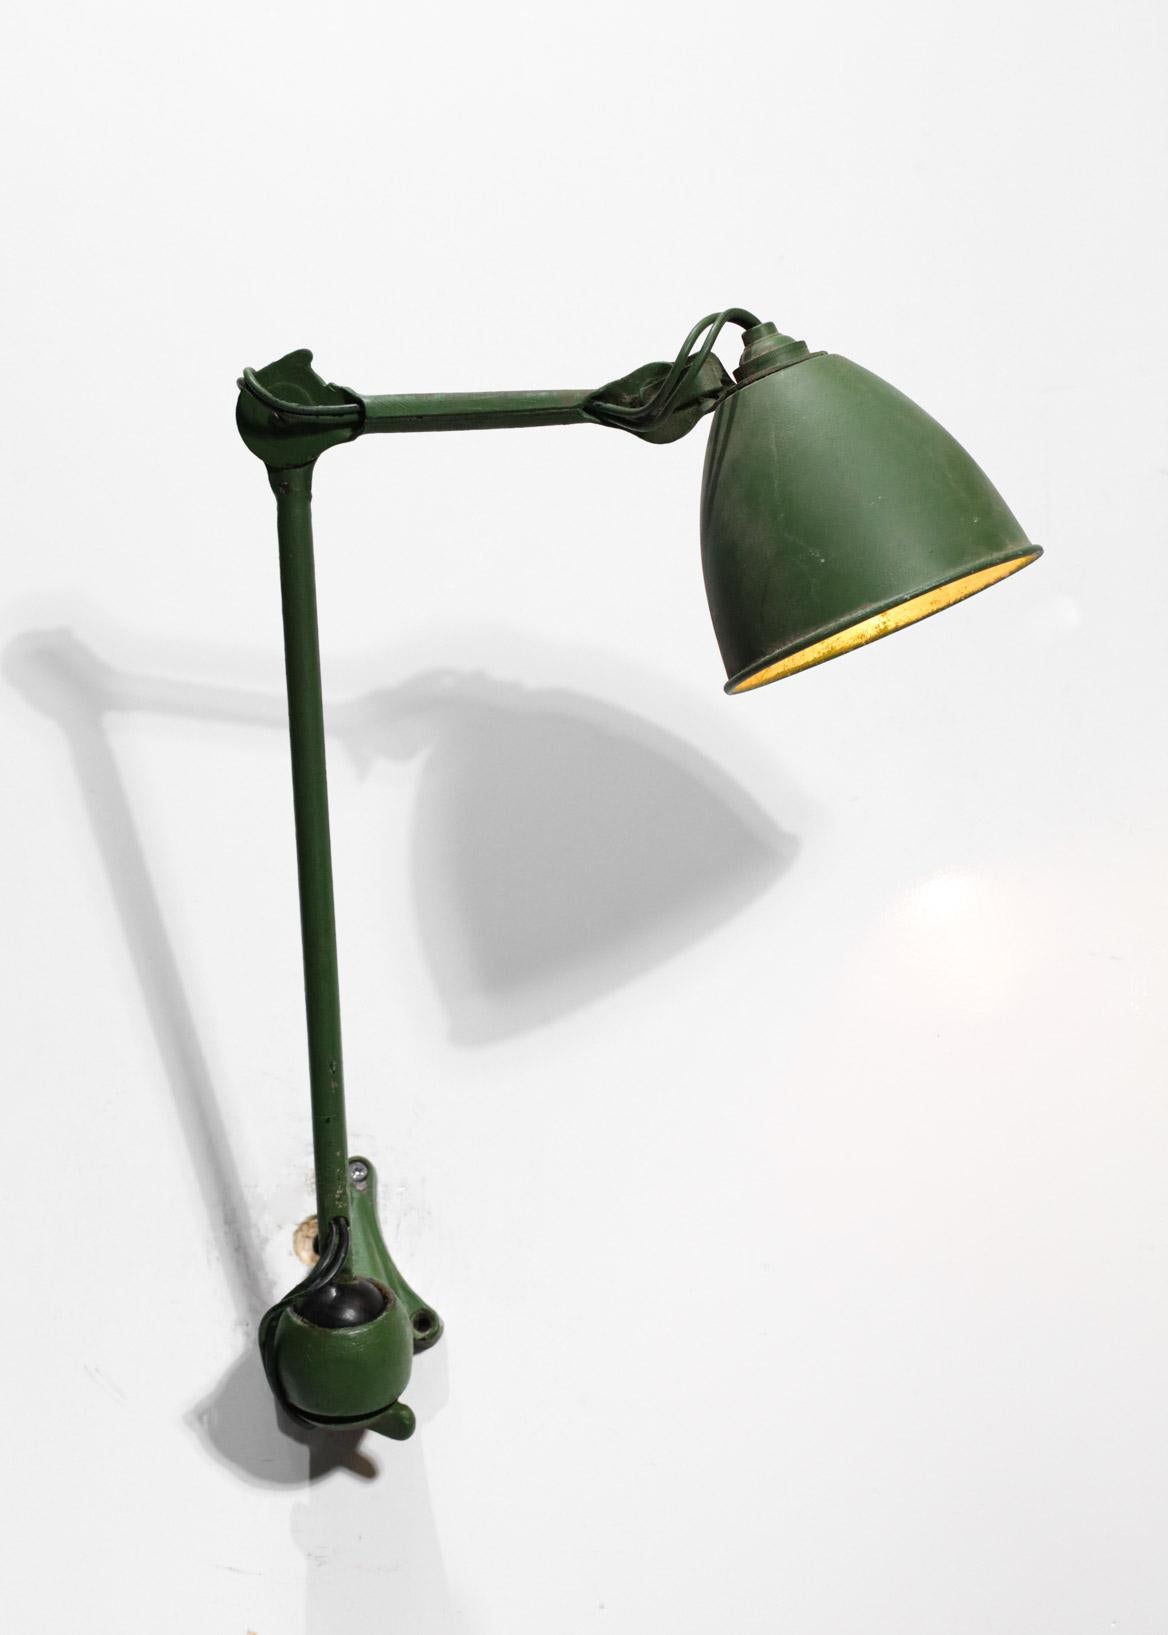 Albert Albin Gras Workshop Lamp Metal Lacquered Le Corbusier Ravel Sconce, G345 In Good Condition For Sale In Lyon, FR